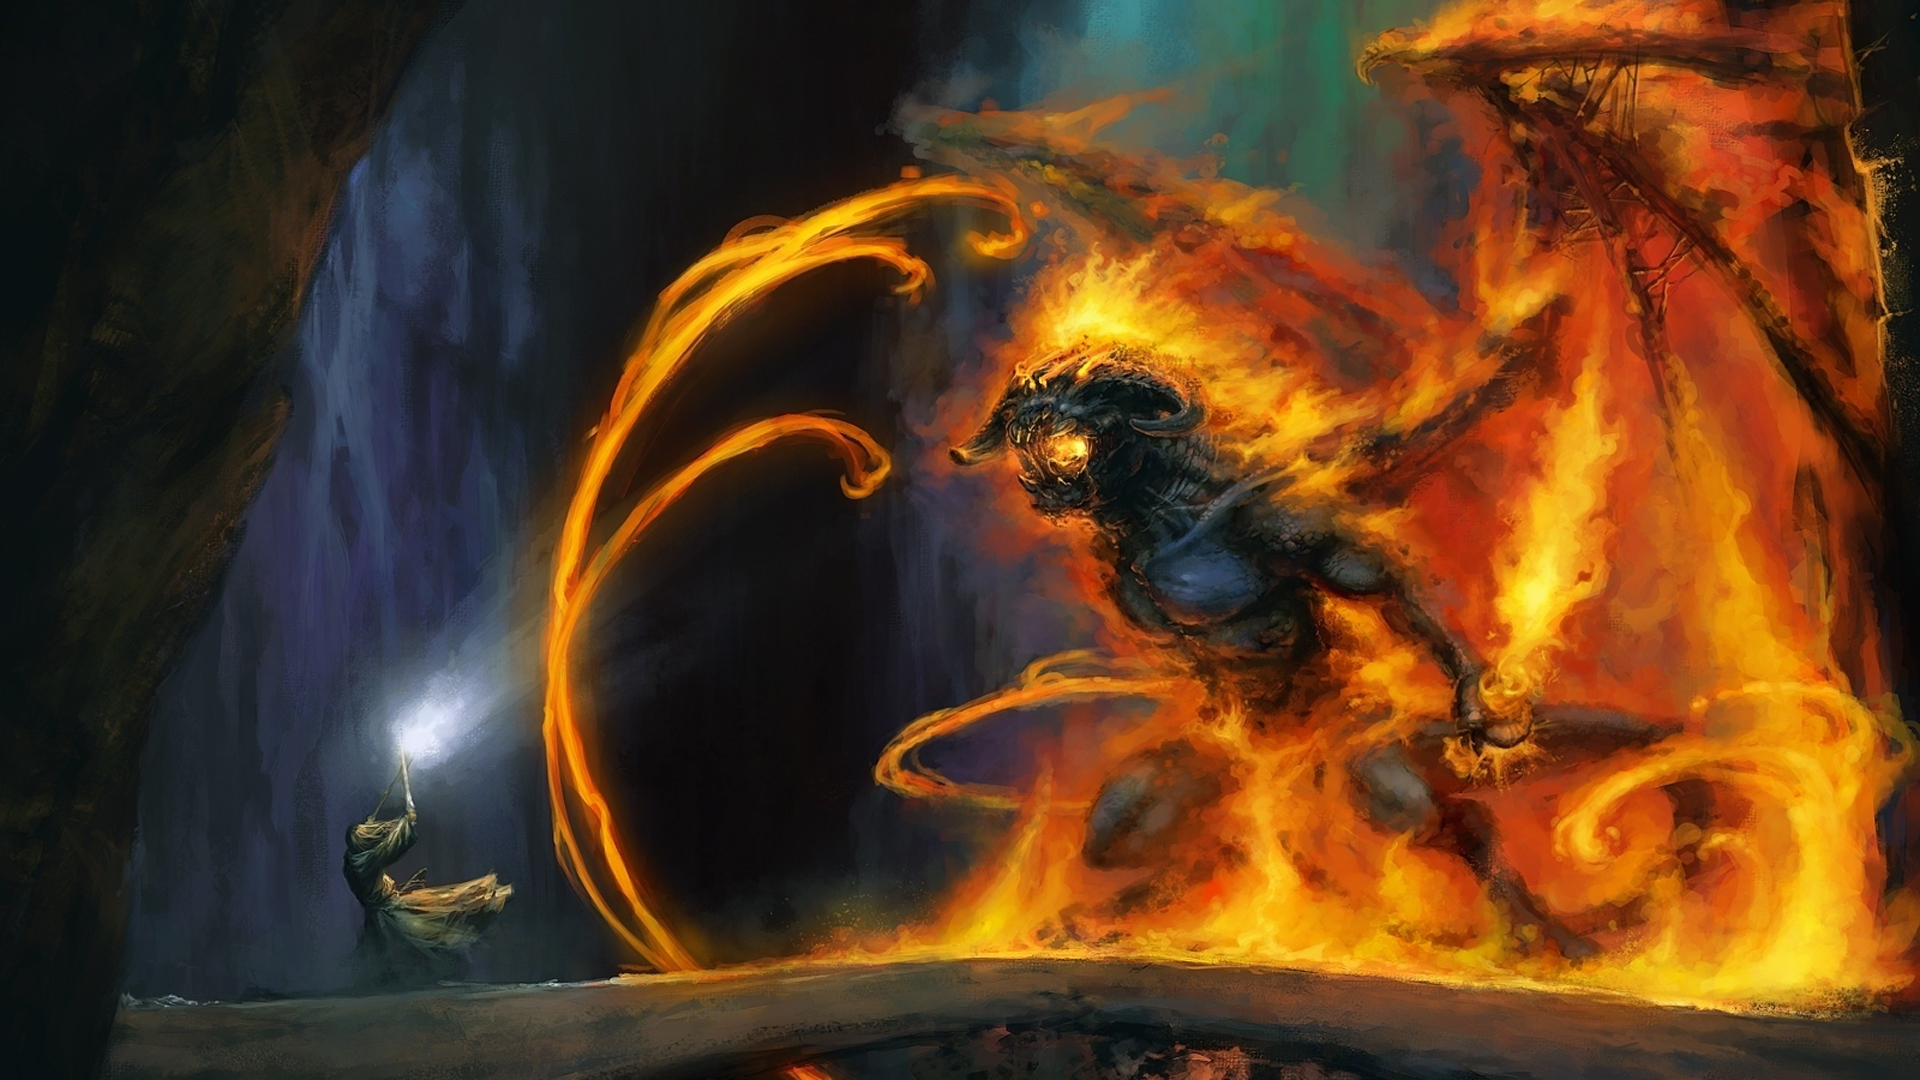 The Lord Of The Rings Balrog Gandalf Moria Fantasy Art The Lord Of The Rings Movies Anime Anime Gand 1920x1080